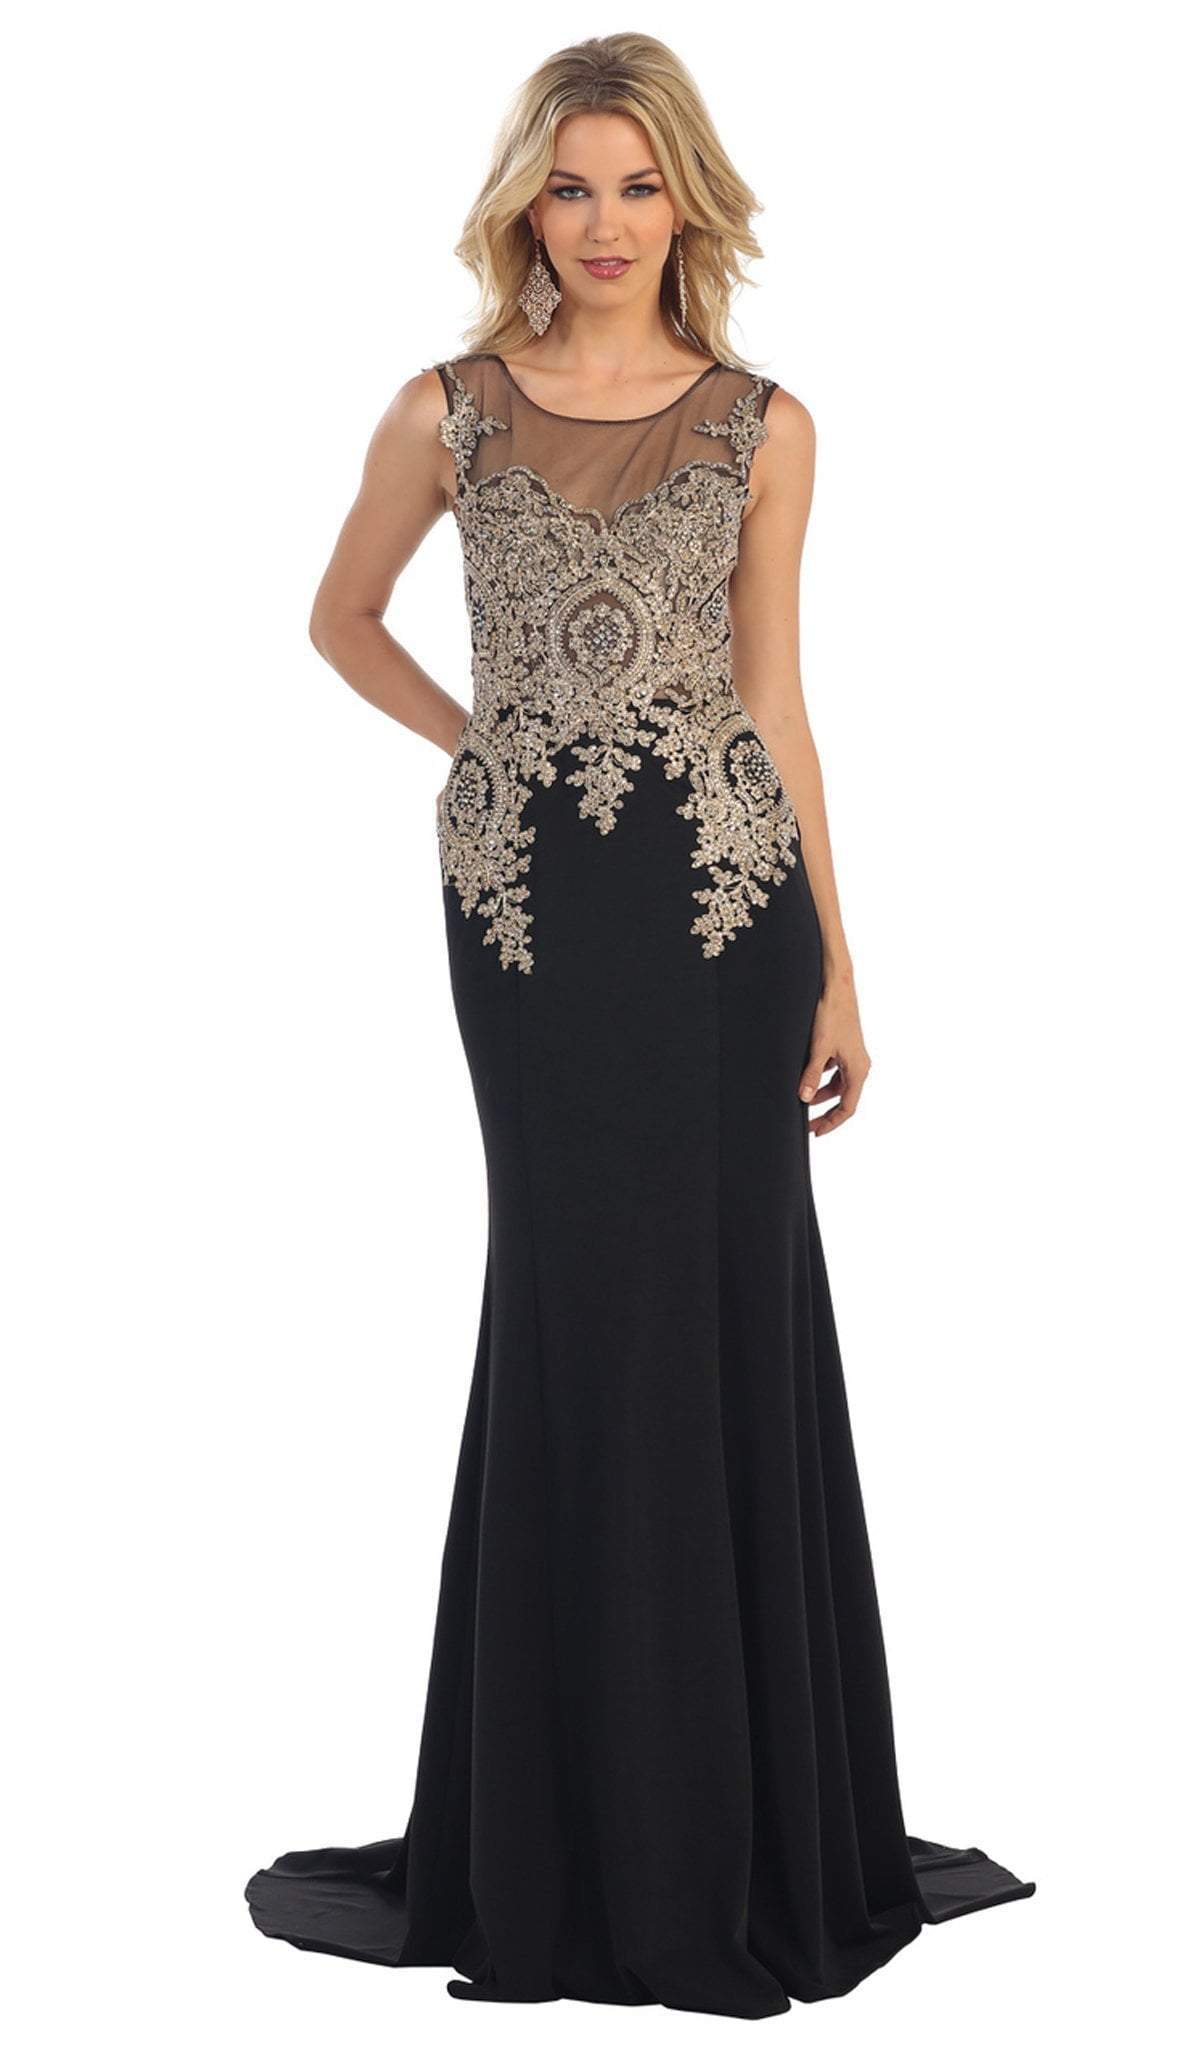 May Queen - Illusion Scoop Lace Prom Gown Special Occasion Dress 4 / Black